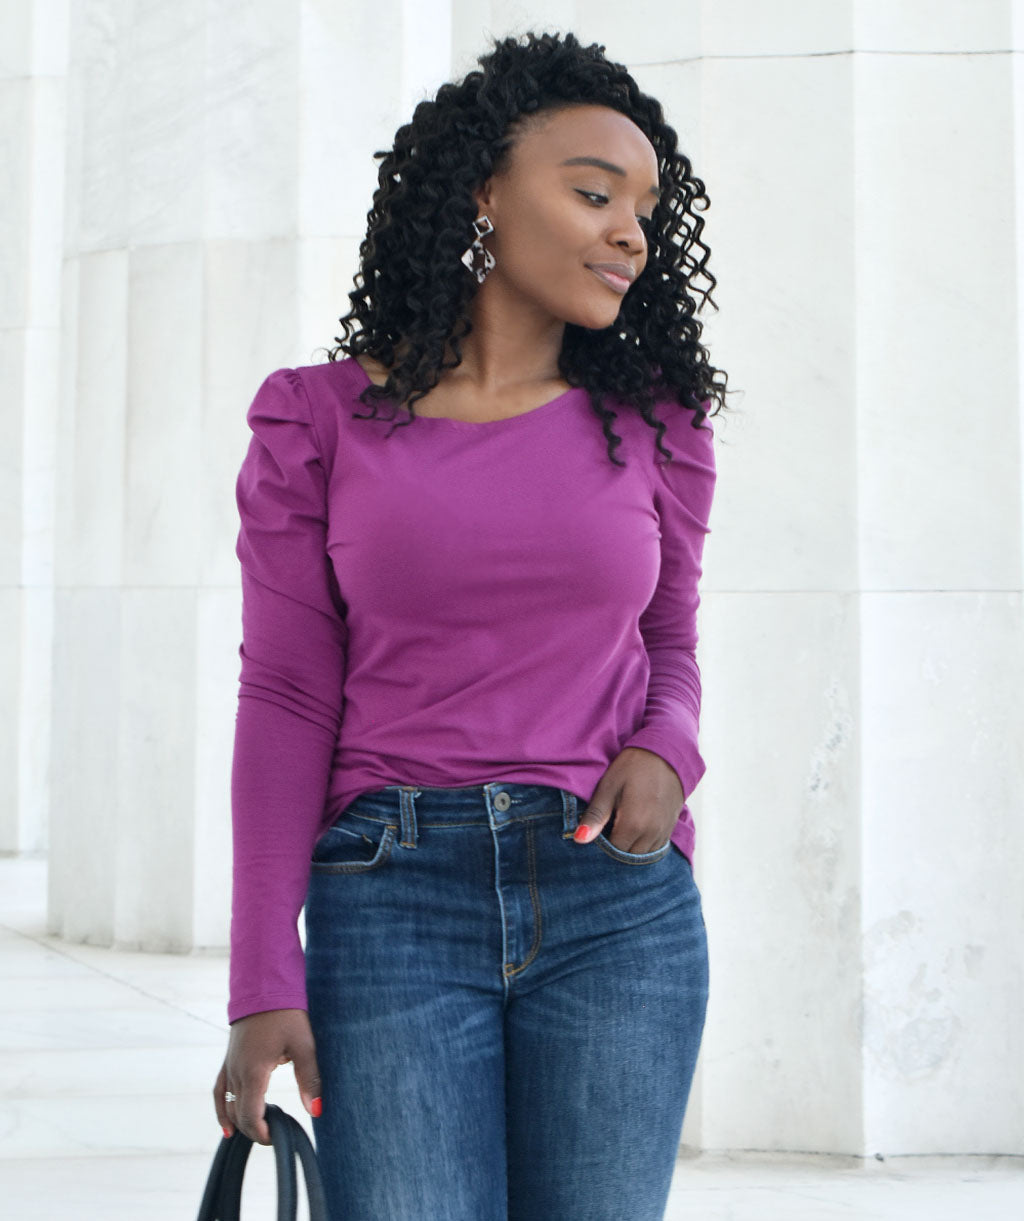 The AUDREY top in Boysenberry